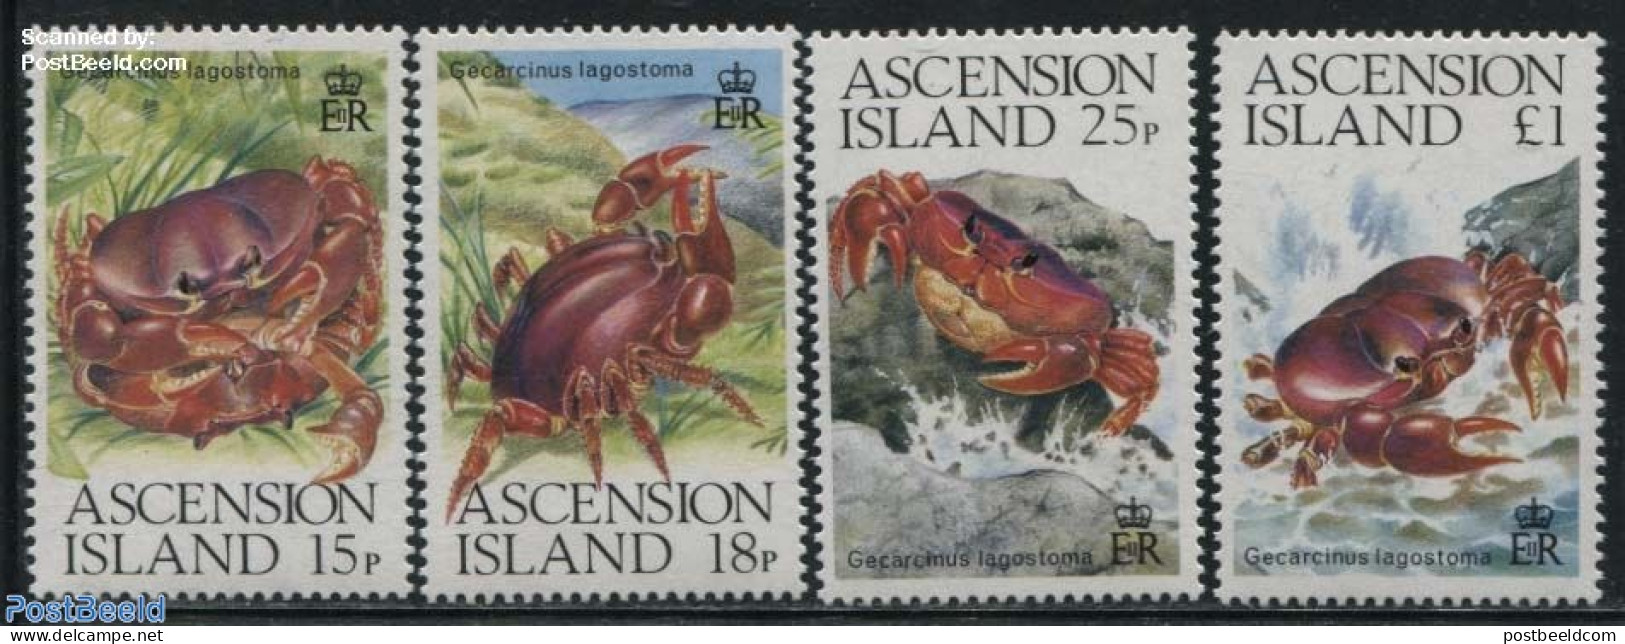 Ascension 1989 Crabs 4v, Mint NH, Nature - Shells & Crustaceans - Crabs And Lobsters - Vie Marine